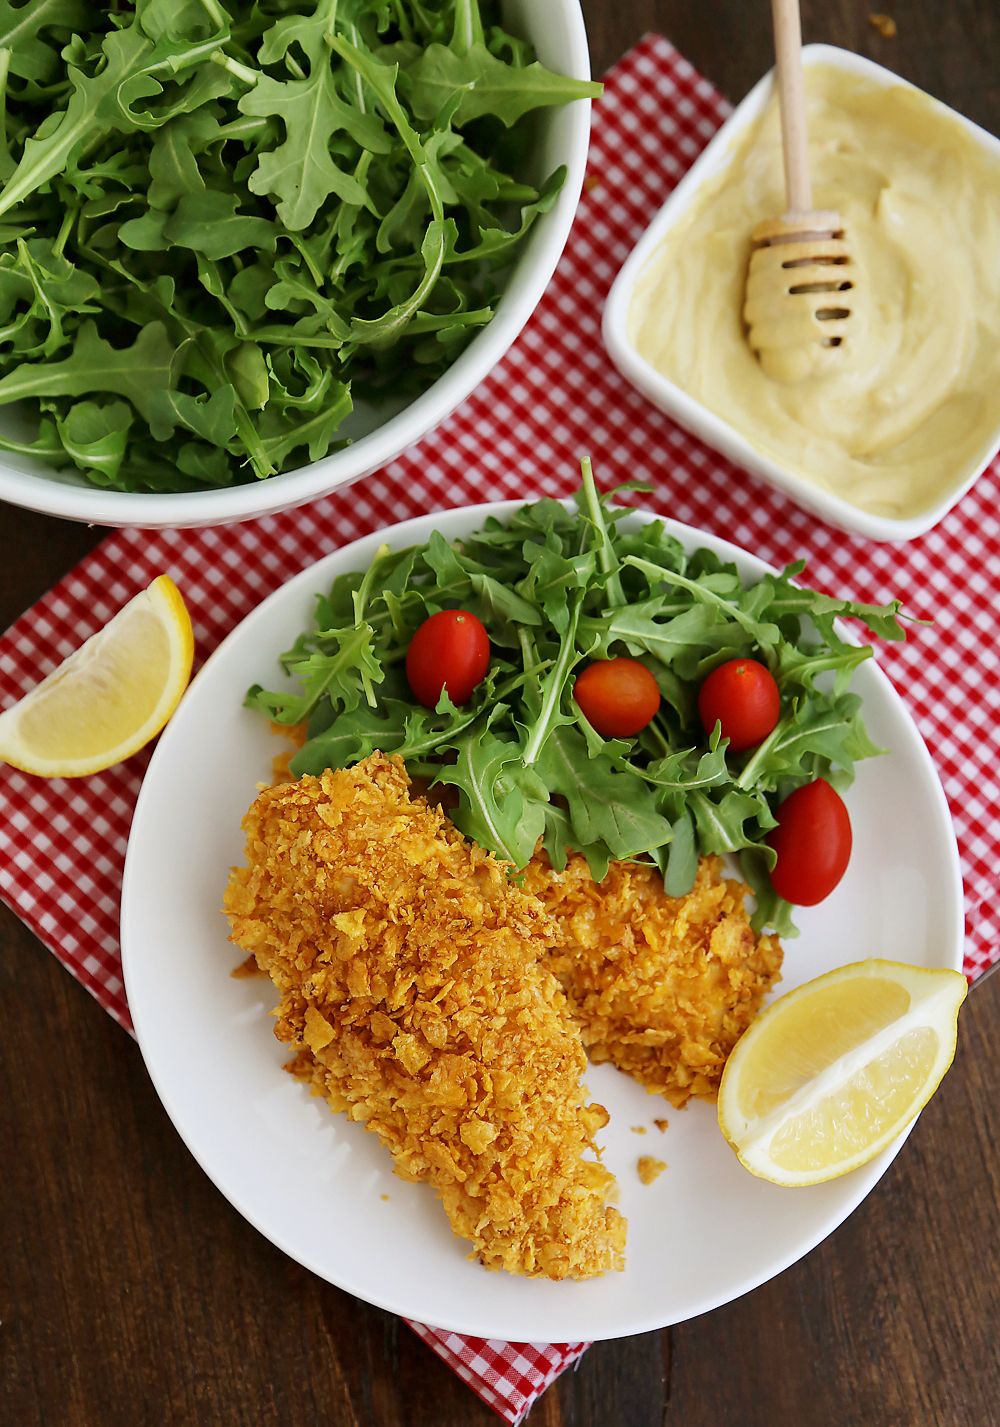 Crispy Honey-Dijon Baked Chicken Tenders - Cornflake crusted chicken with honey mustard dipping sauce (recipe included) makes a perfect weeknight meal that kids and adults will love! Thecomfortofcooking.com